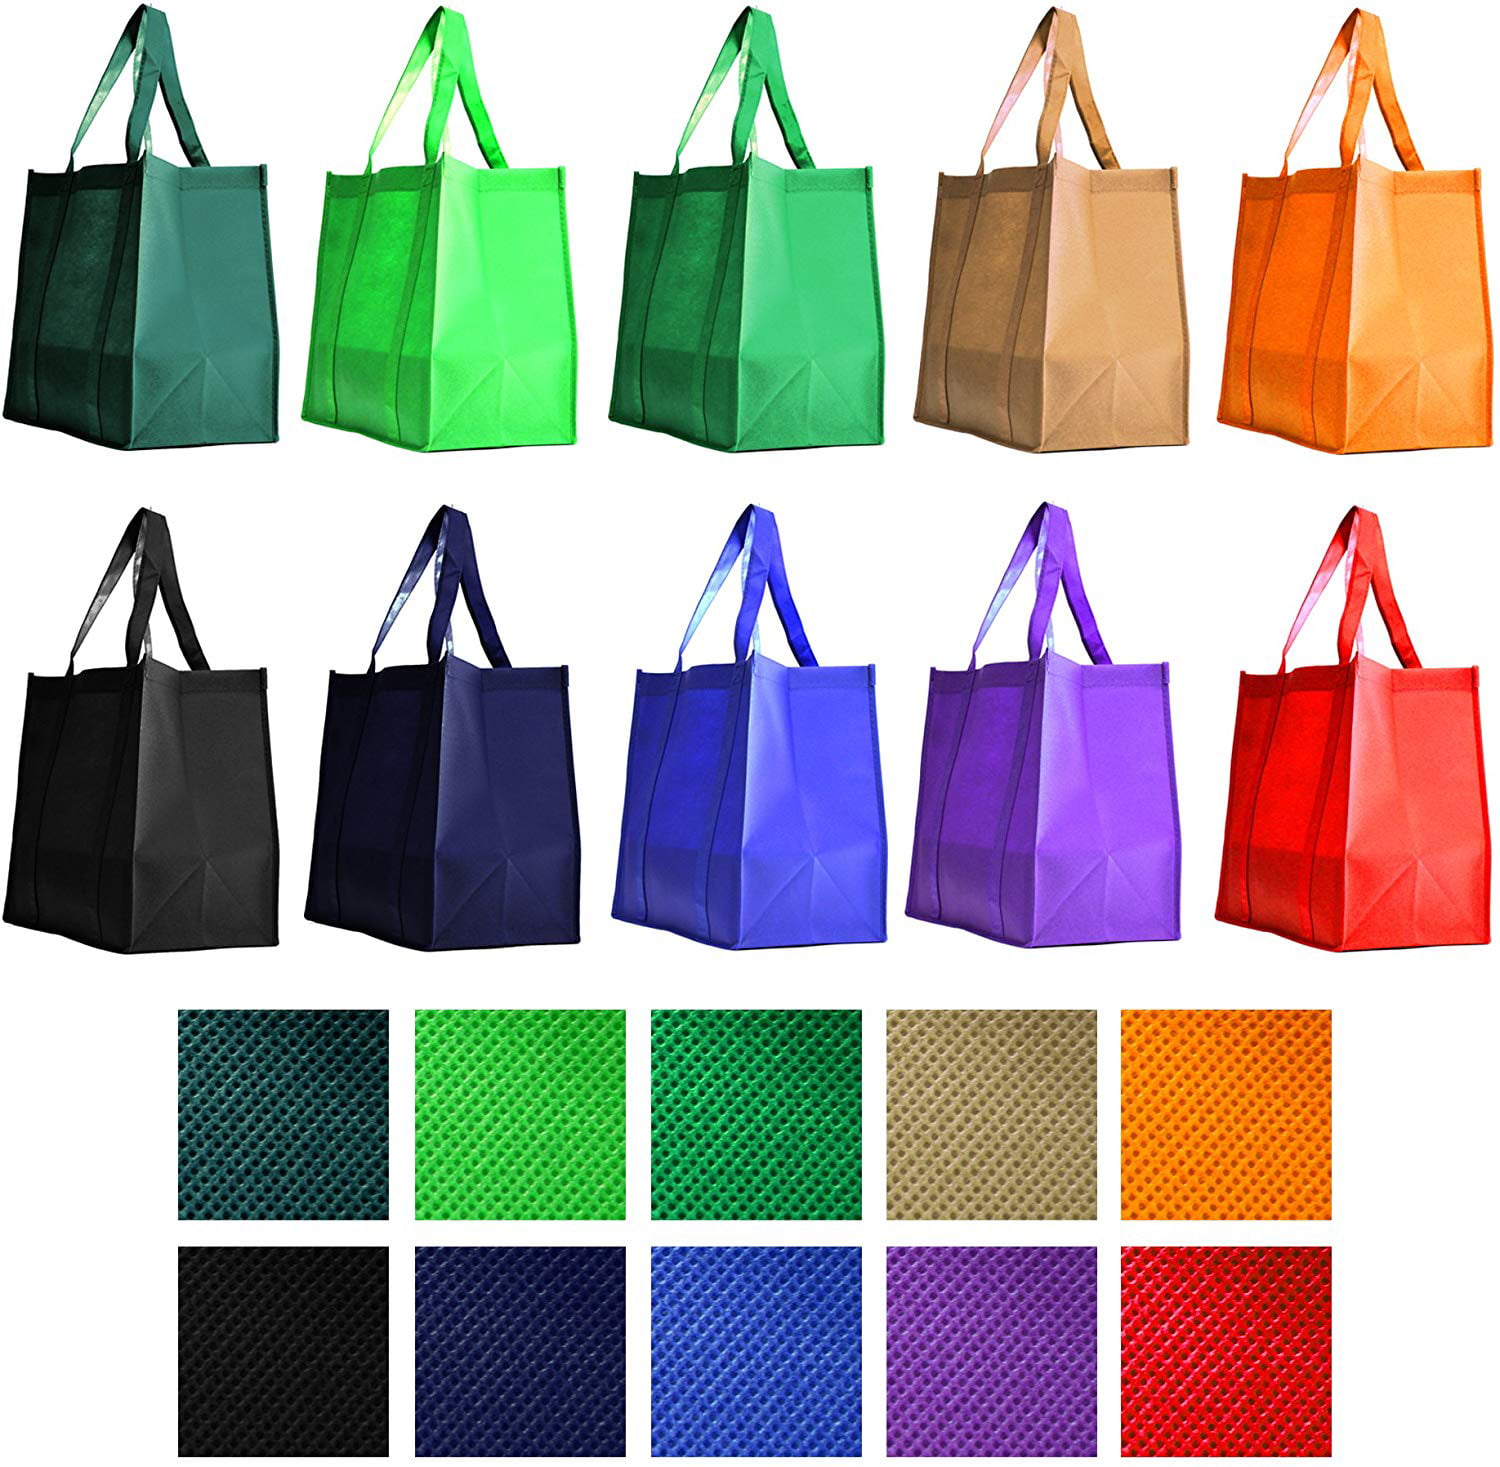  Foremost Reusable Bags Extra Large HD Assorted Colors Square  Pattern 4 Pack Multi-Purpose Totes, blue, red, gray and green (74003): Home  & Kitchen